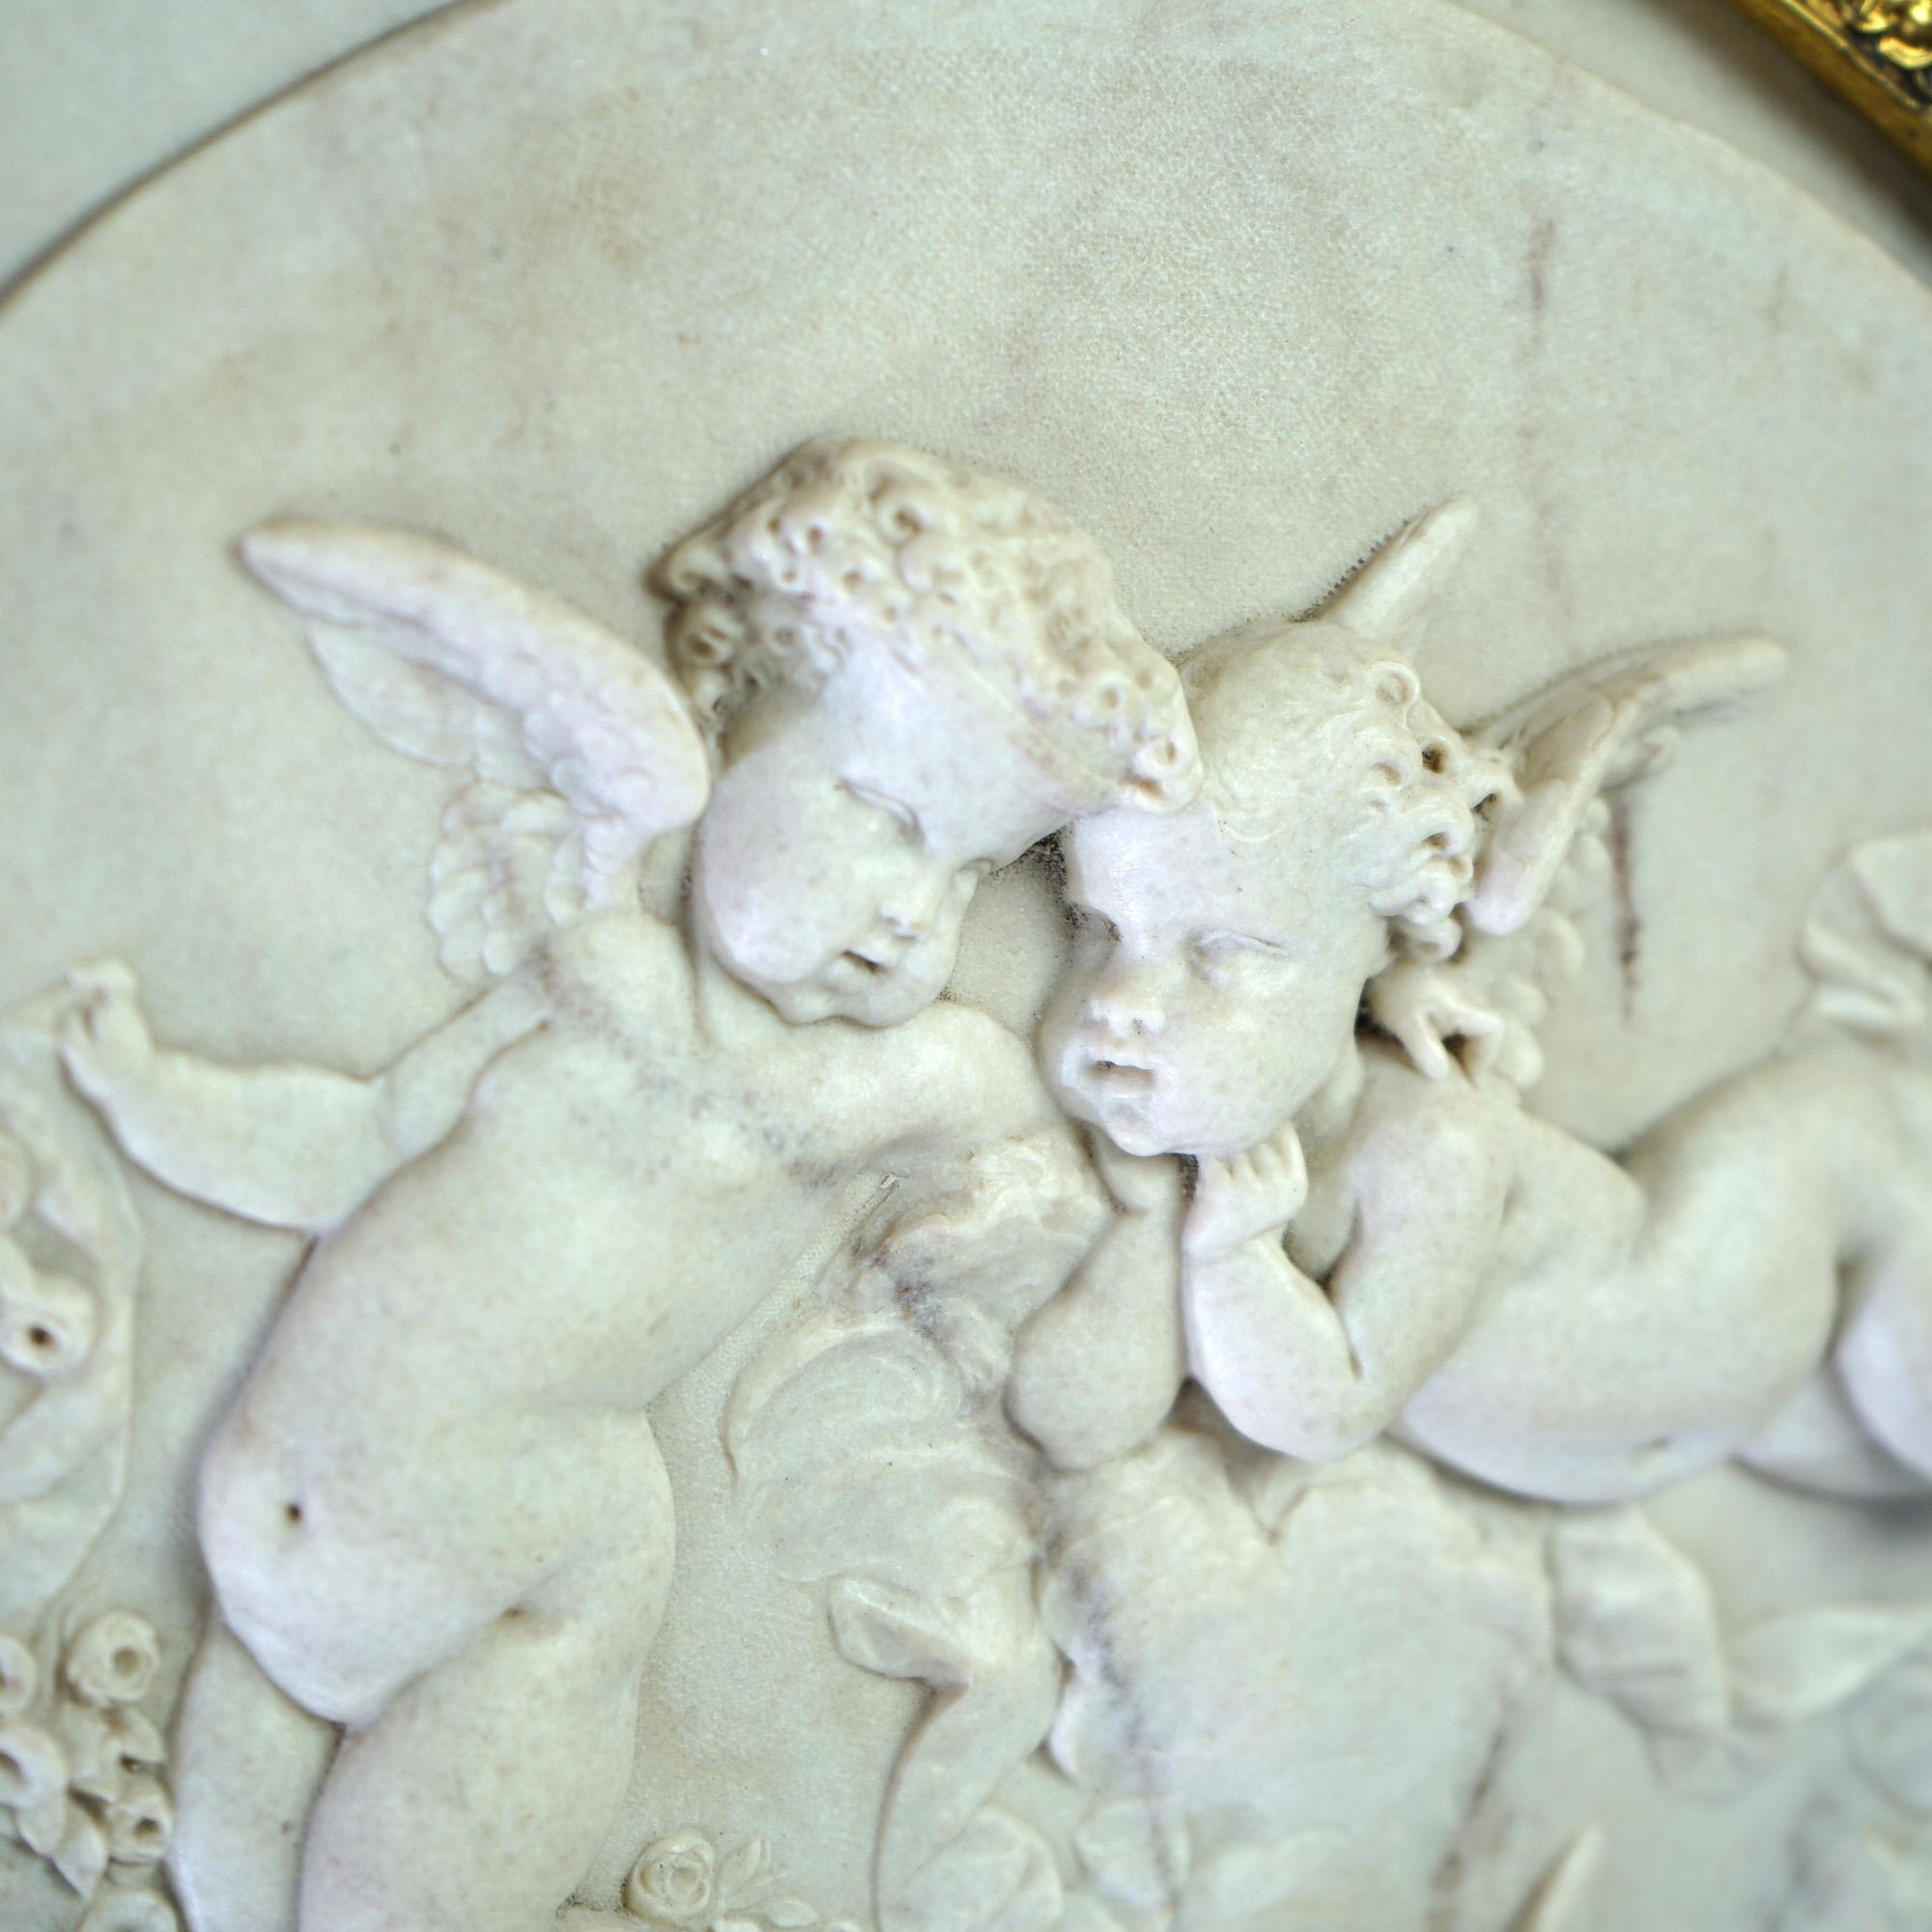 Antique Classical Carved Marble Plaque with Winged Cherubs In High Relief, by Bertaux, Exposition Universelle 1889, Seated in More Recent Giltwood Frame 19th C

Measures - 22.75